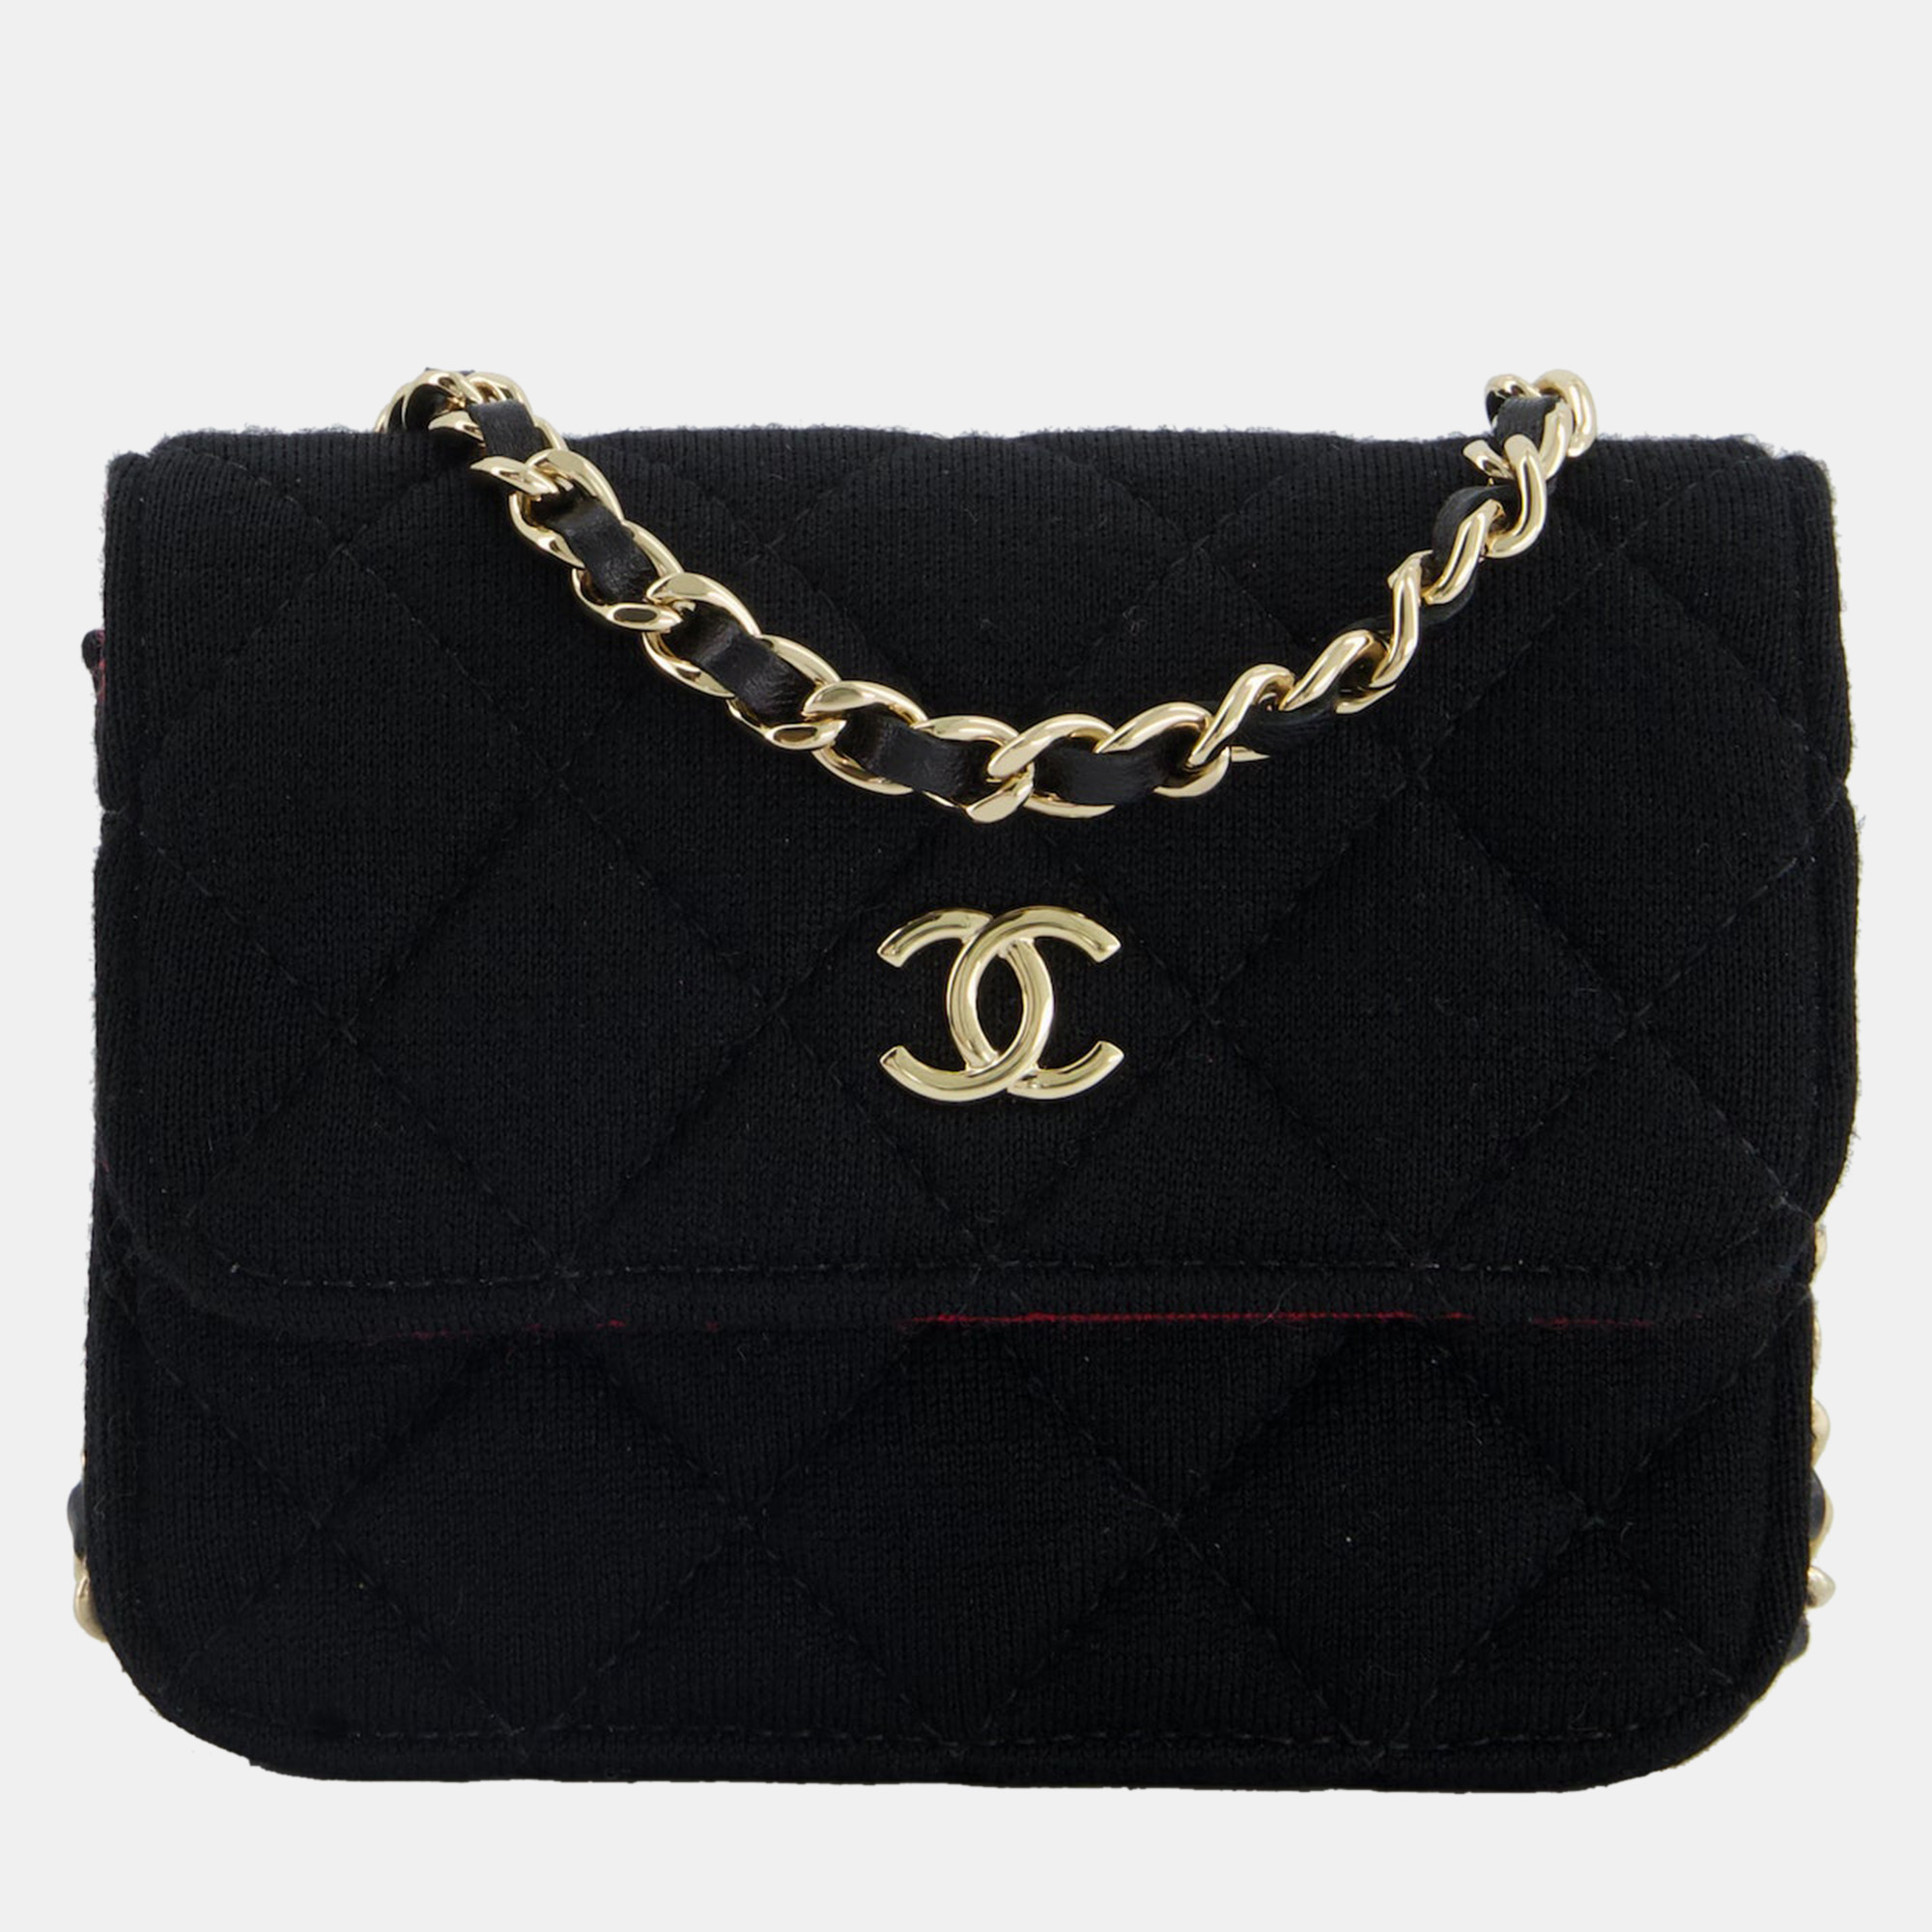 Chanel ultra mini black jersey fabric cross-body bag with champagne gold hardware